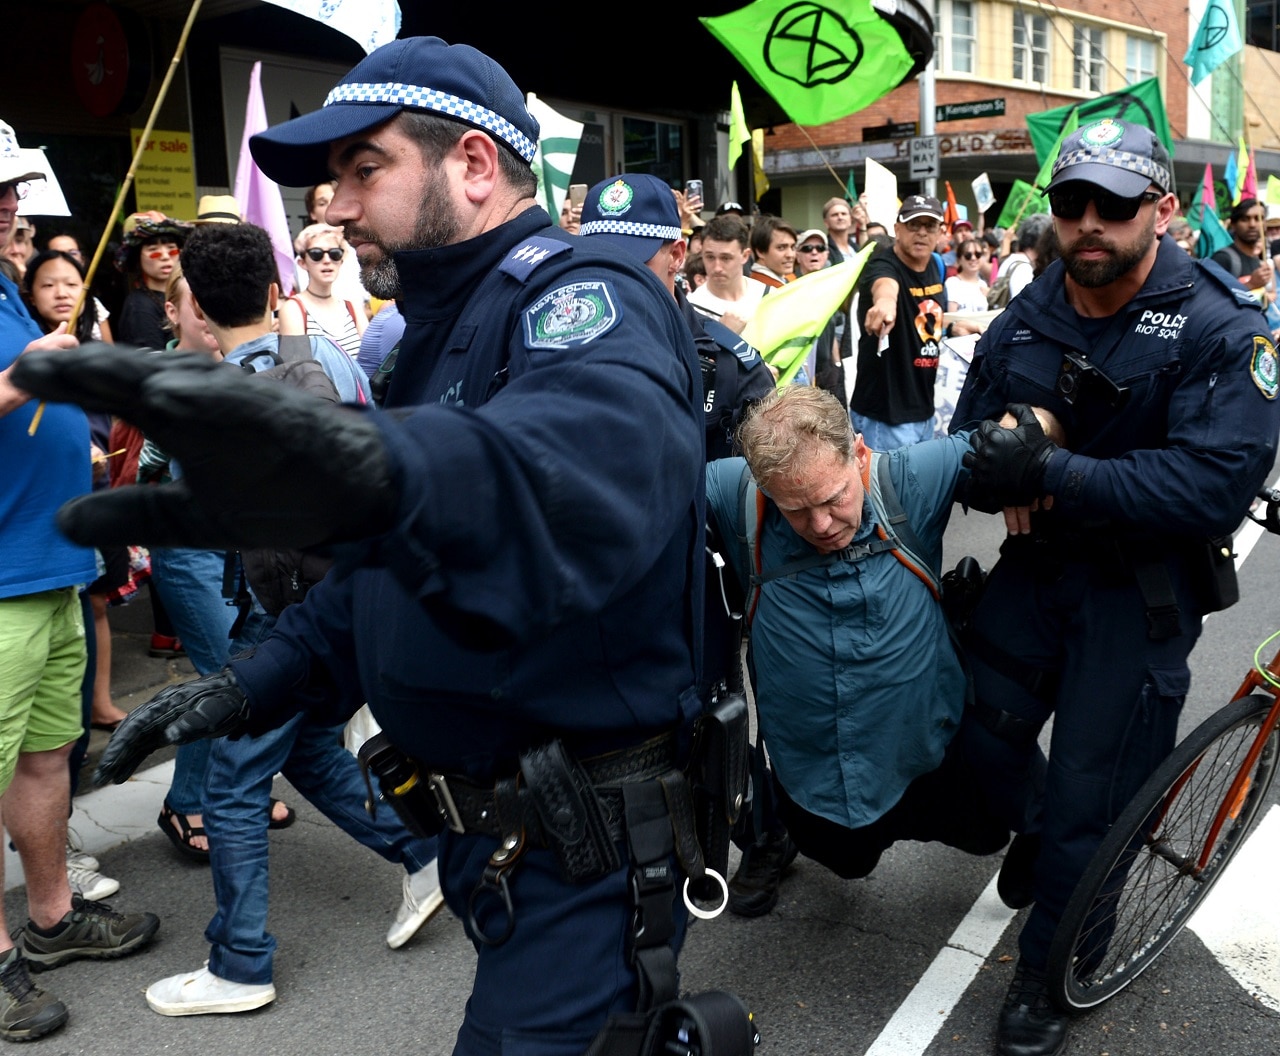 Protesters are removed and arrested during an Extinction Rebellion protest in Sydney.